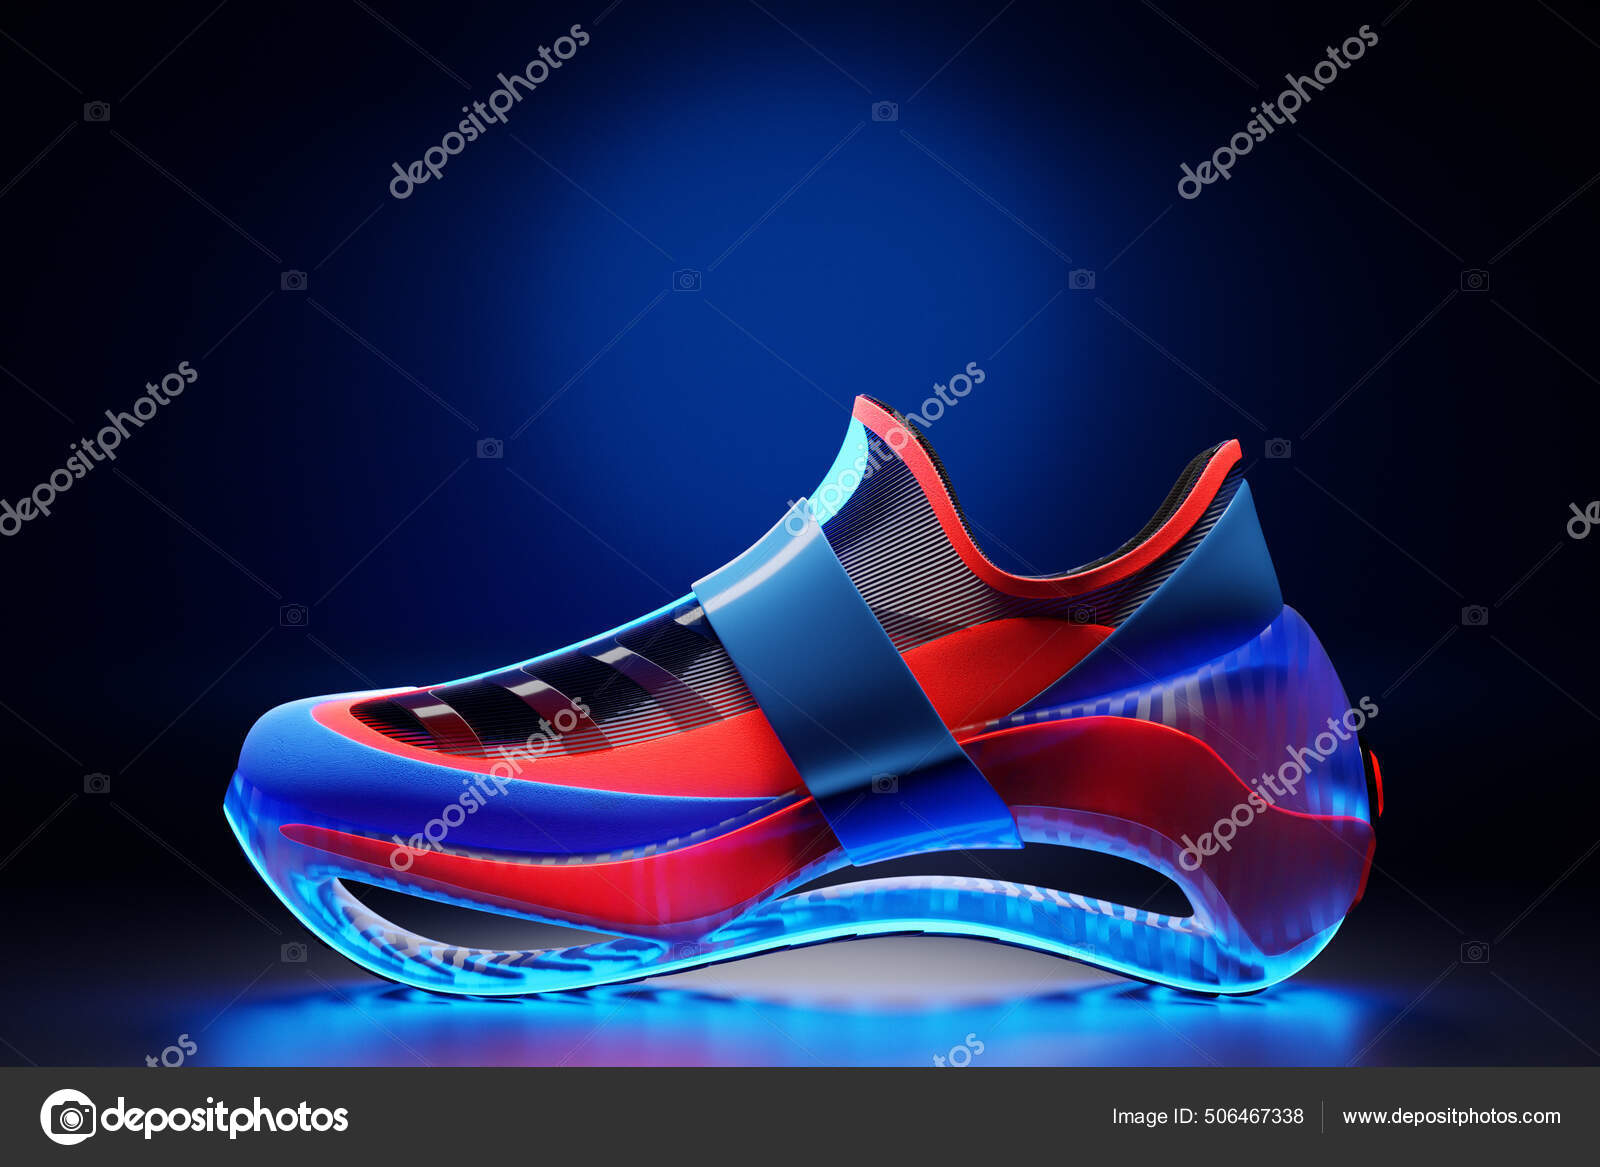 Premium Photo  Black women's shoes with red soles. 3d rendering  illustration.